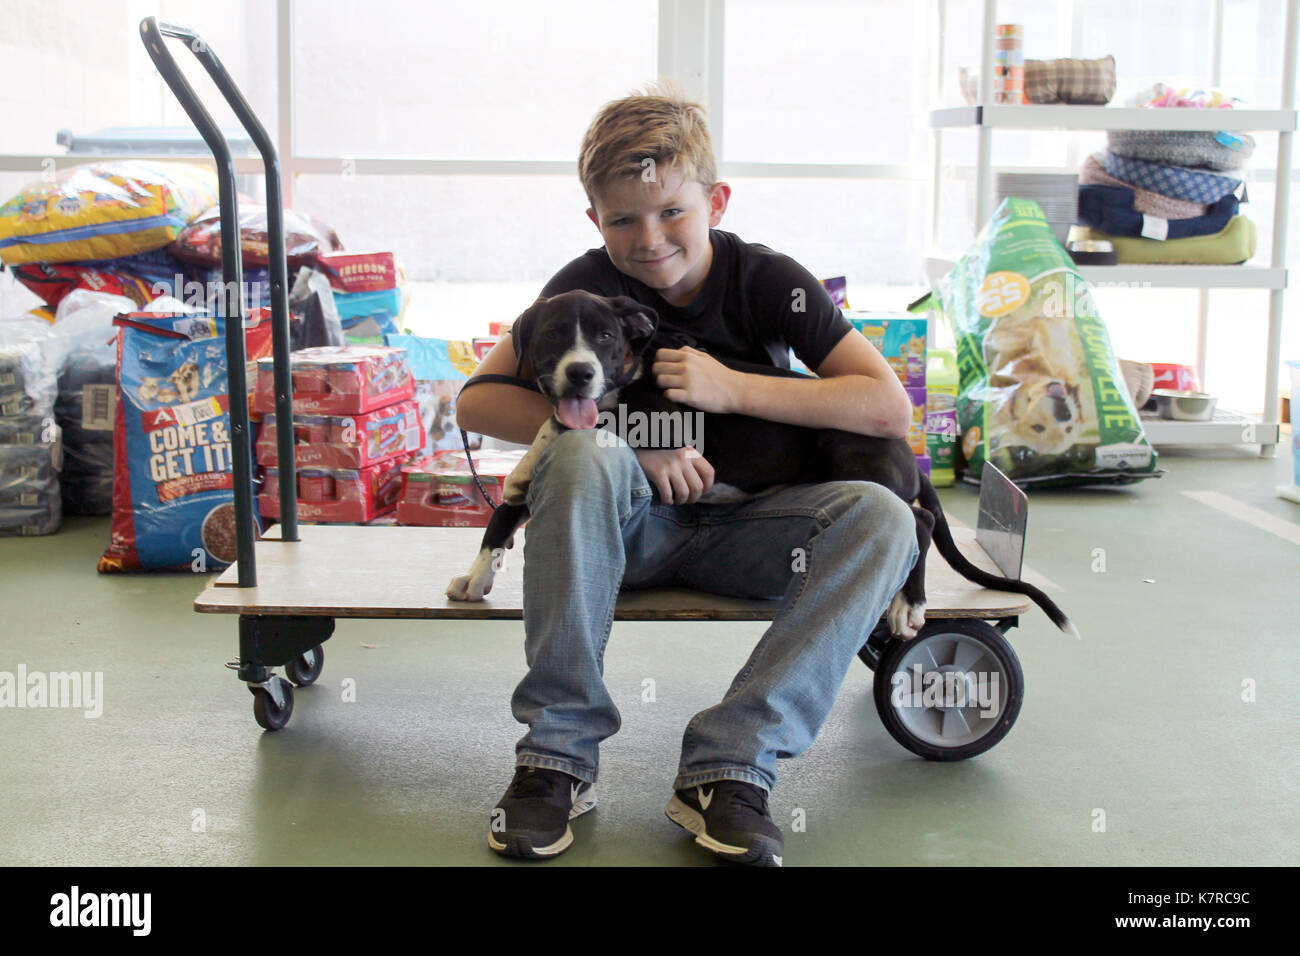 Houston, USA. 9th Sep, 2017. A boy embraces his dog in the Hurricane Harvey Animal Rescue Shelter in La Marque, Texas, the United States, Sept. 9, 2017. Three shelters in the coastal Galveston area of Texas have combined efforts to open the Hurricane Harvey Animal Rescue Shelter at a former greyhound racing track in La Marque, about 65 km south of Houston. Hurricane Harvey caused many pets to be lost, left homeless, abandoned by families, or temporarily left for emergency housing with the three shelters. Credit: Robert Stanton/Xinhua/Alamy Live News Stock Photo